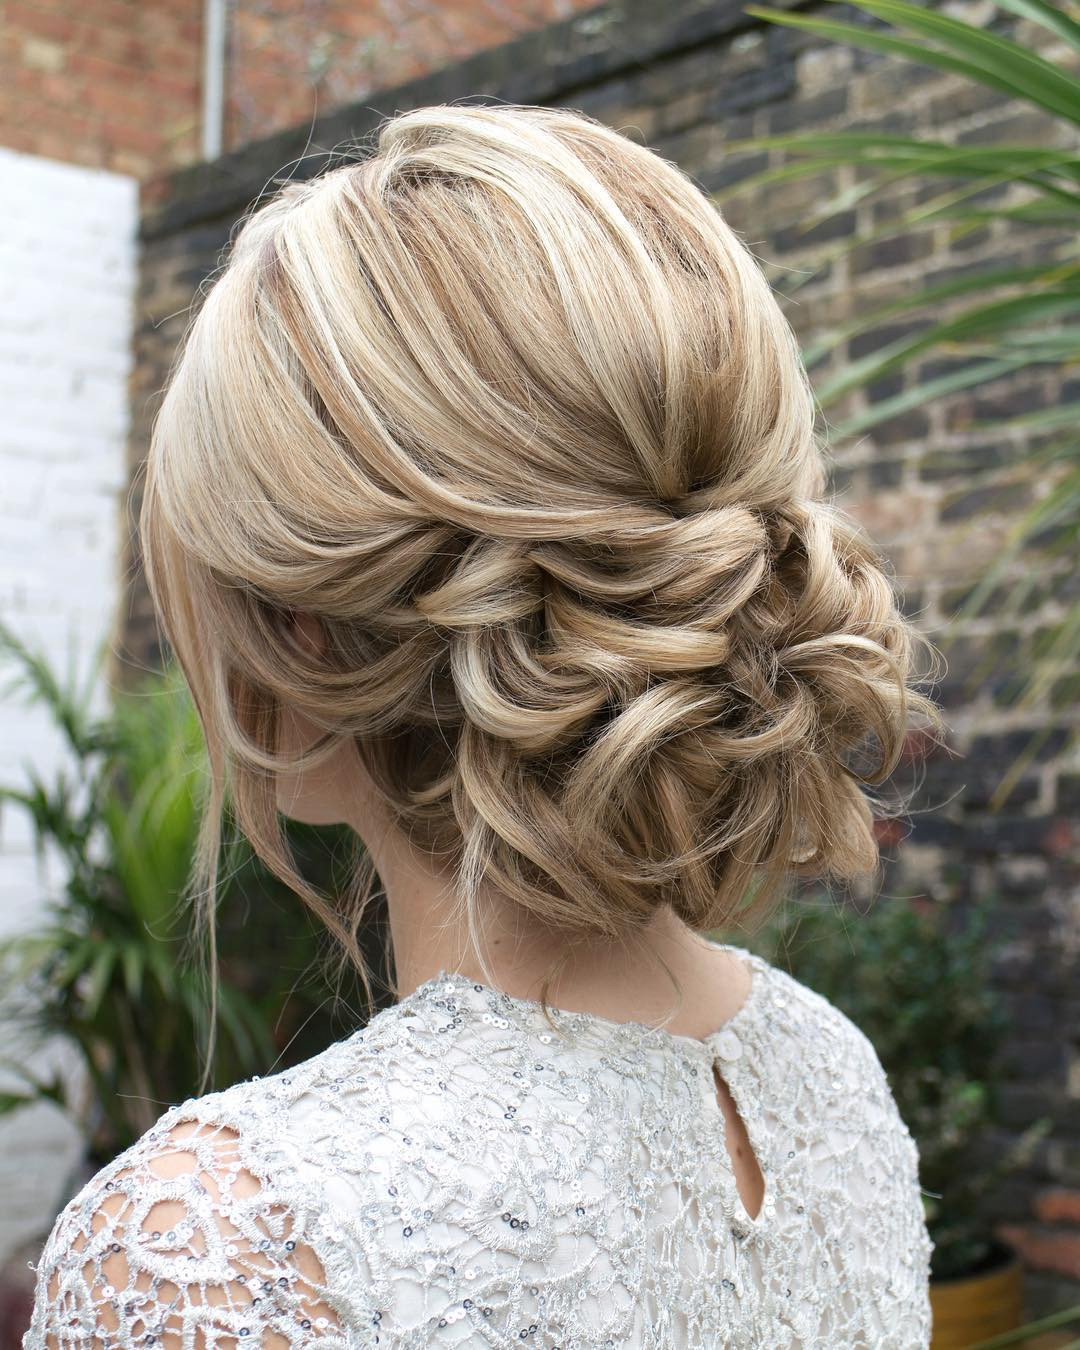 Images Of Prom Hairstyles
 10 Gorgeous Prom Updos for Long Hair Prom Updo Hairstyles